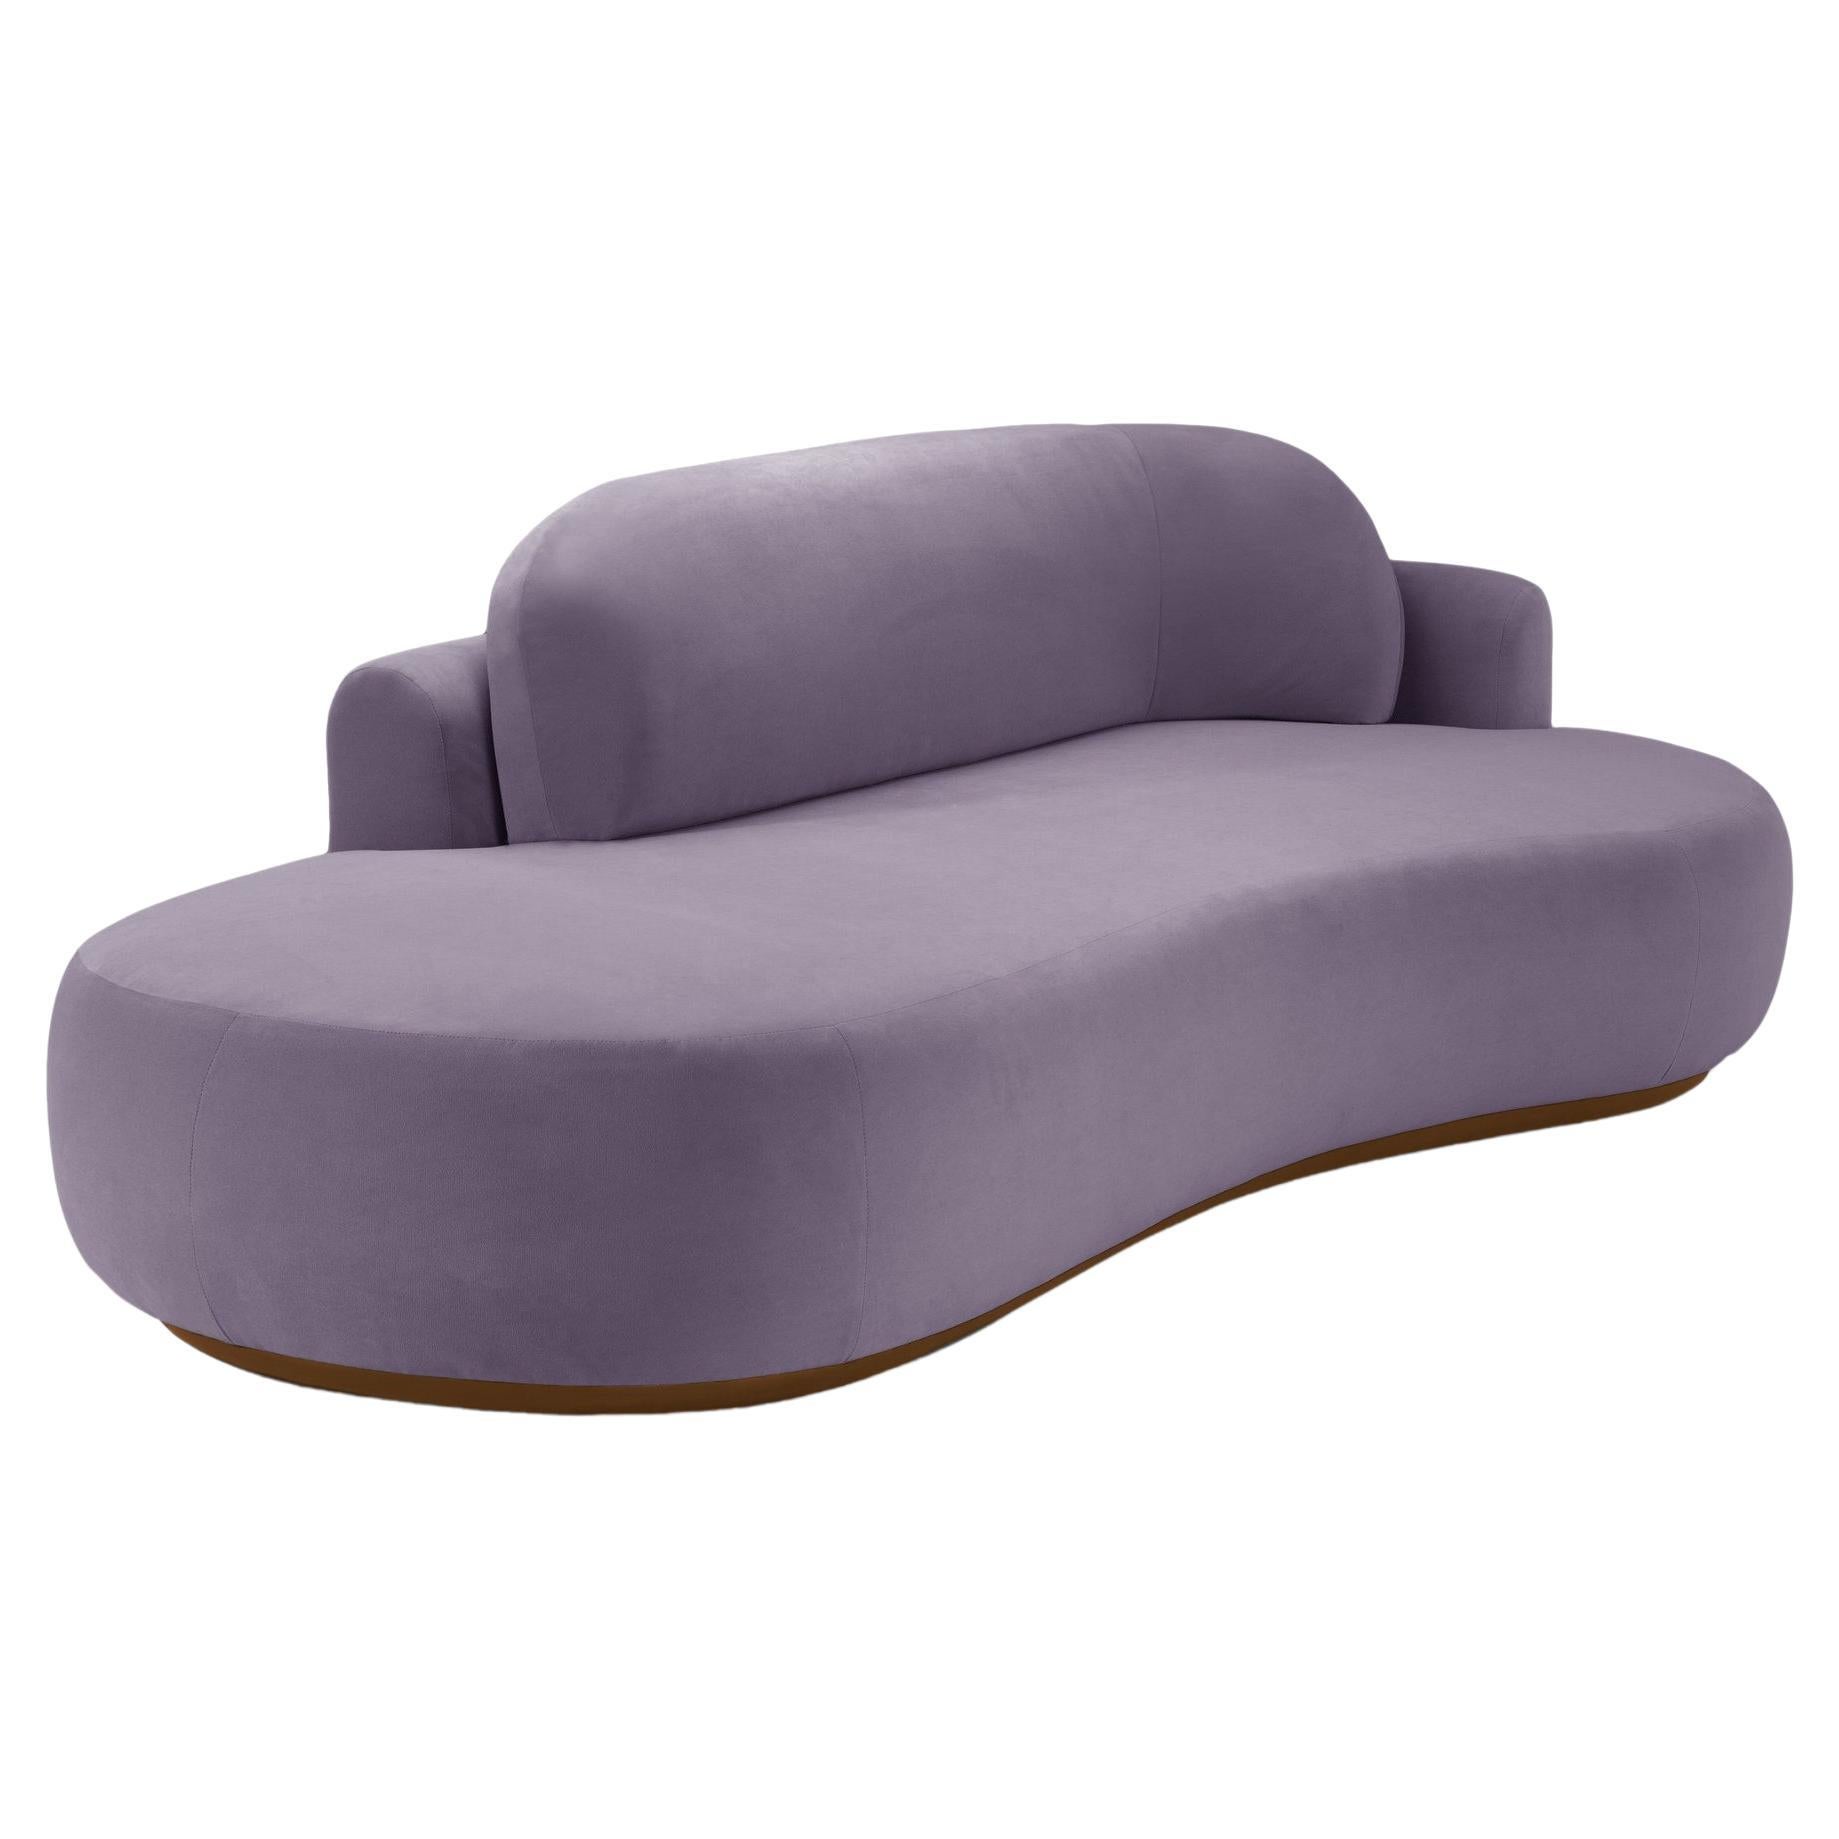 Naked Curved Sofa Single with Beech Ash-056-1 and Paris Lavanda For Sale